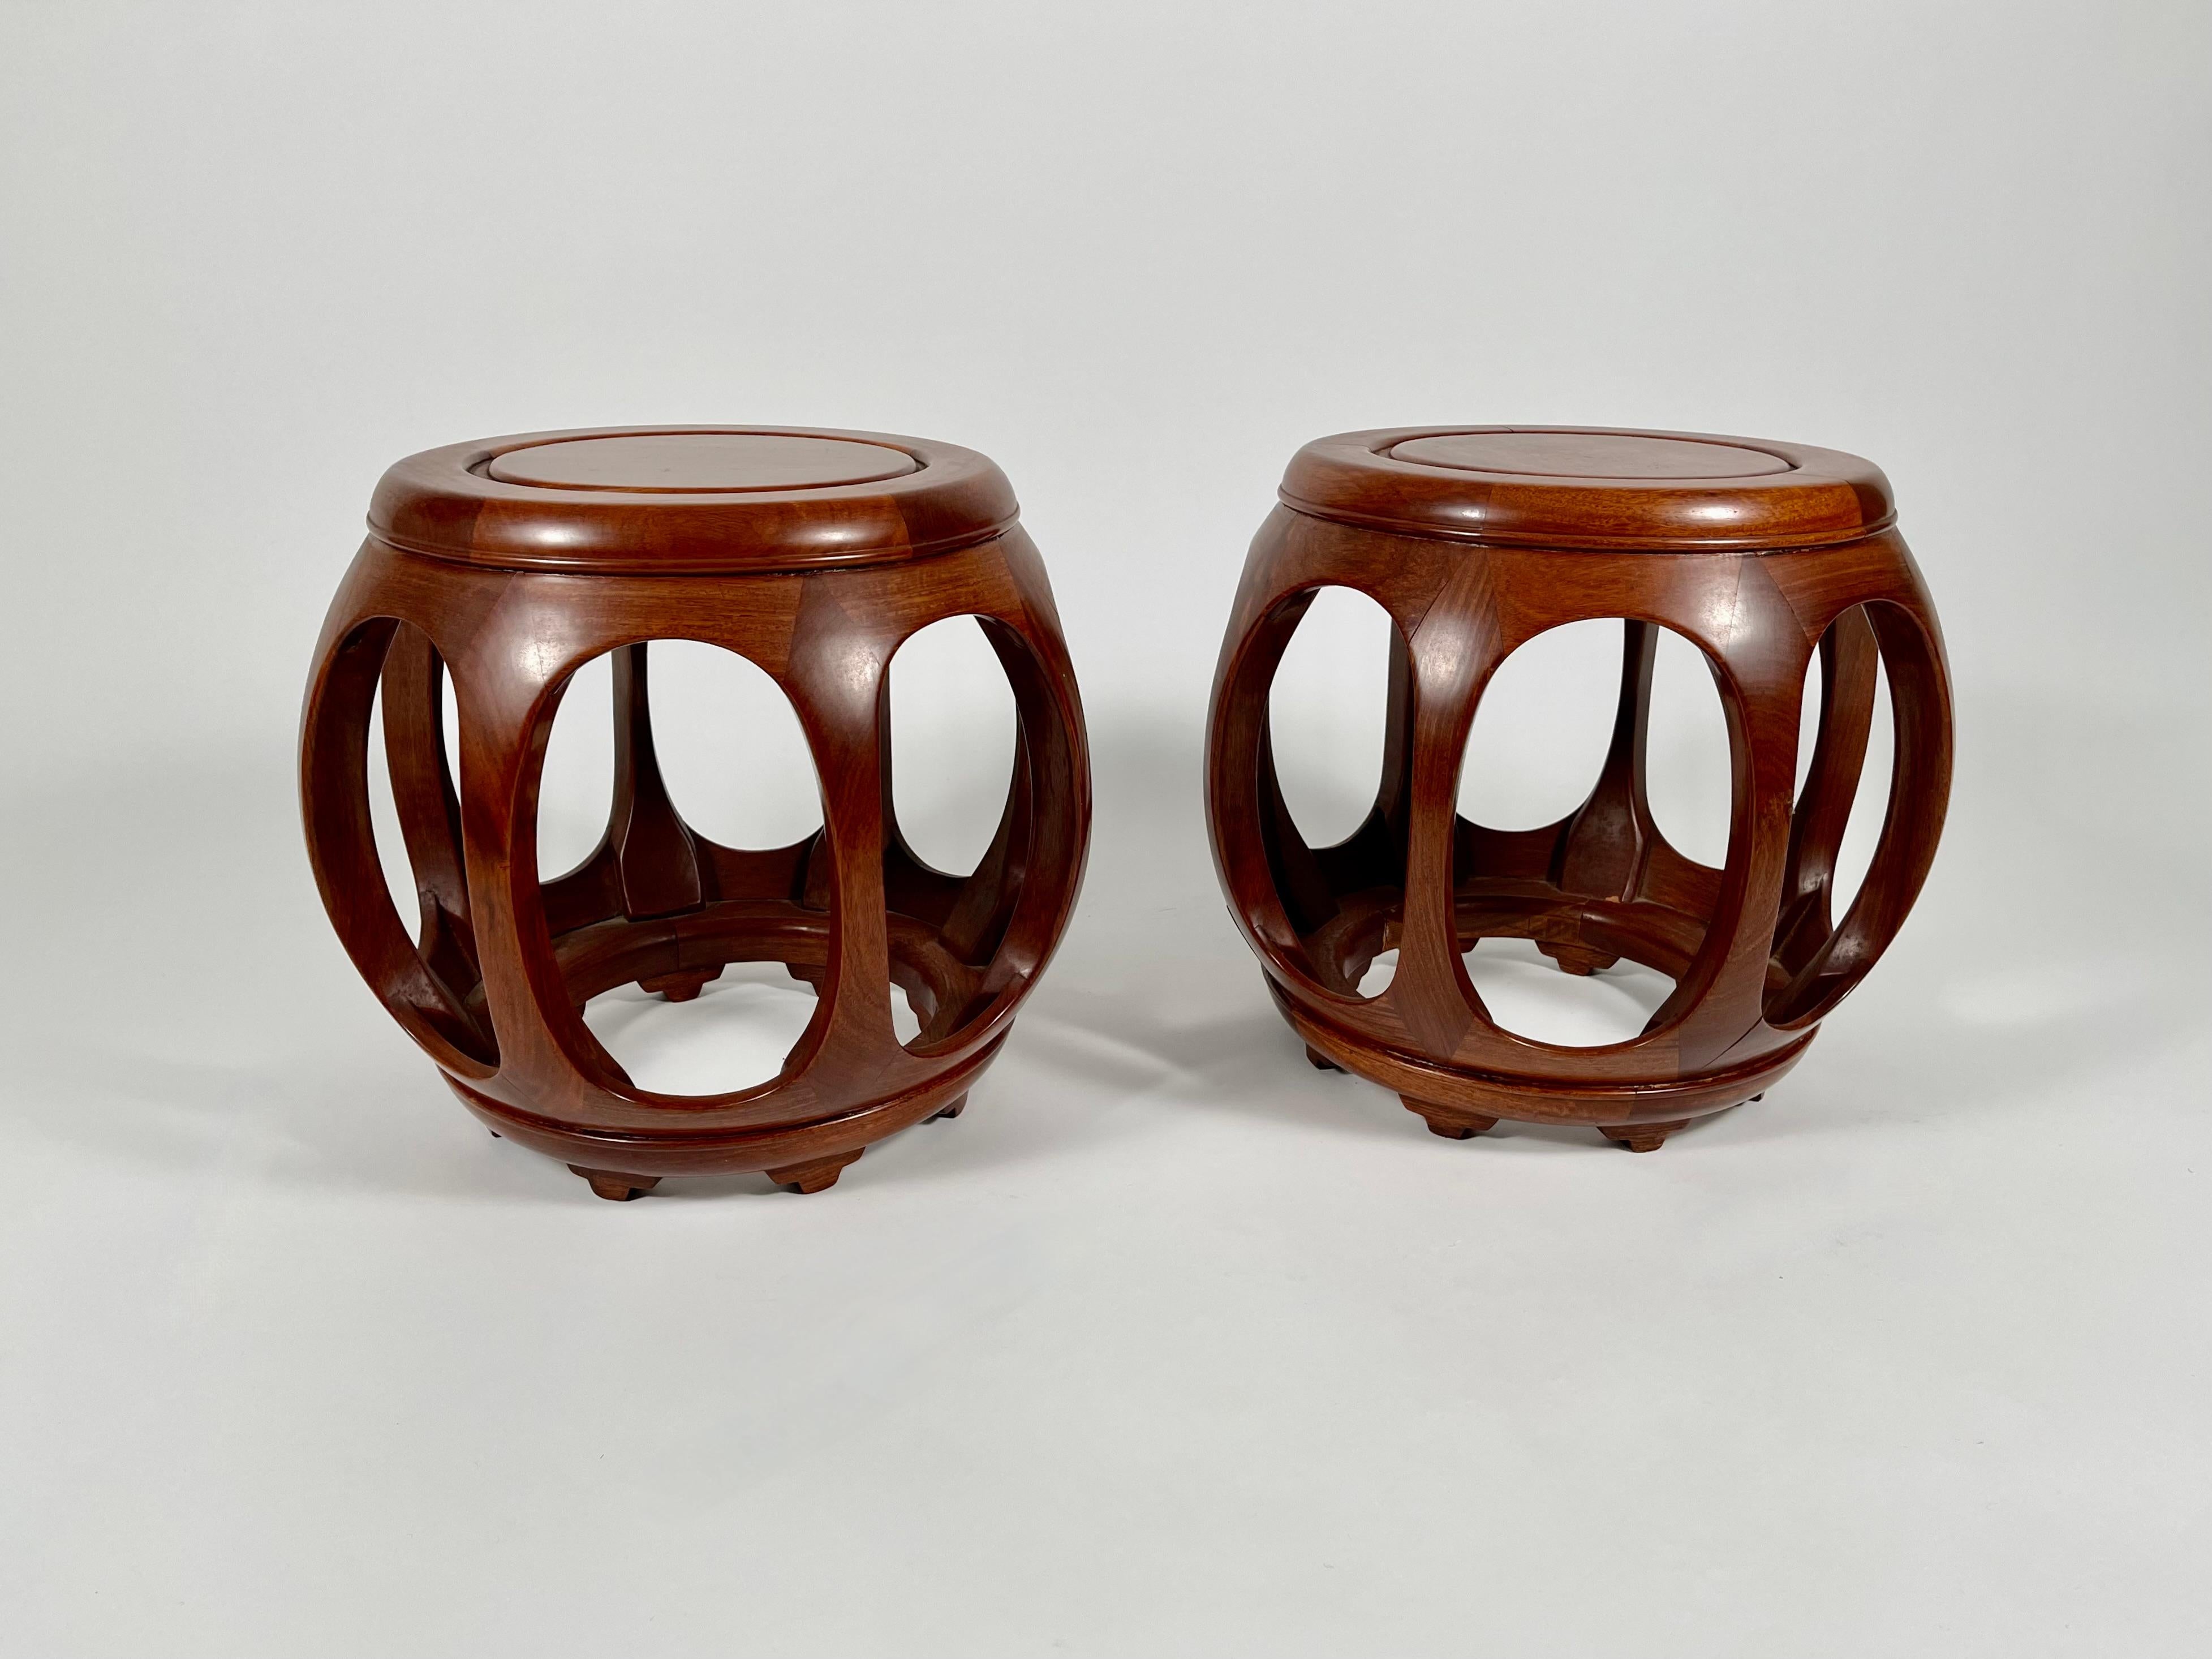 20th Century Pair of Chinese Melon-Form Hardwood Stools, Drinks Tables